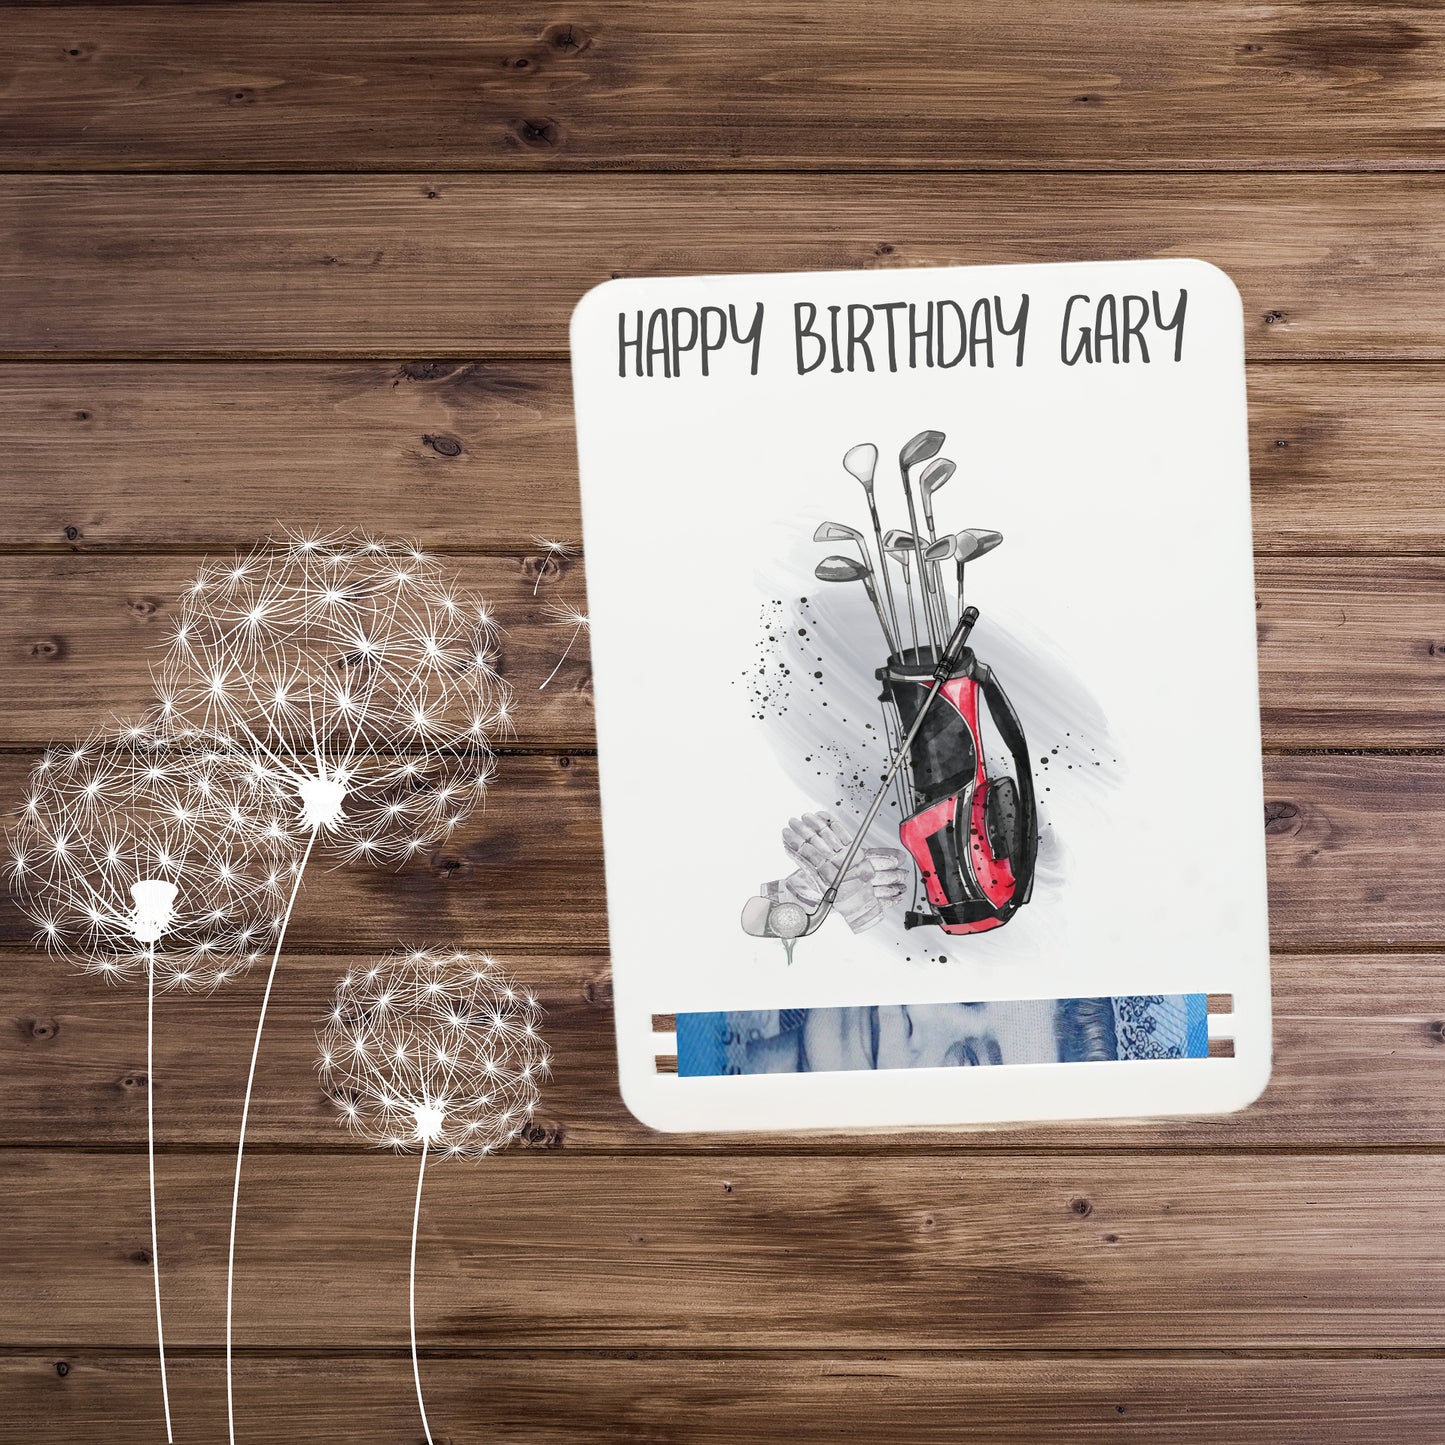 Golfing Gifts | Gifts for Golfers